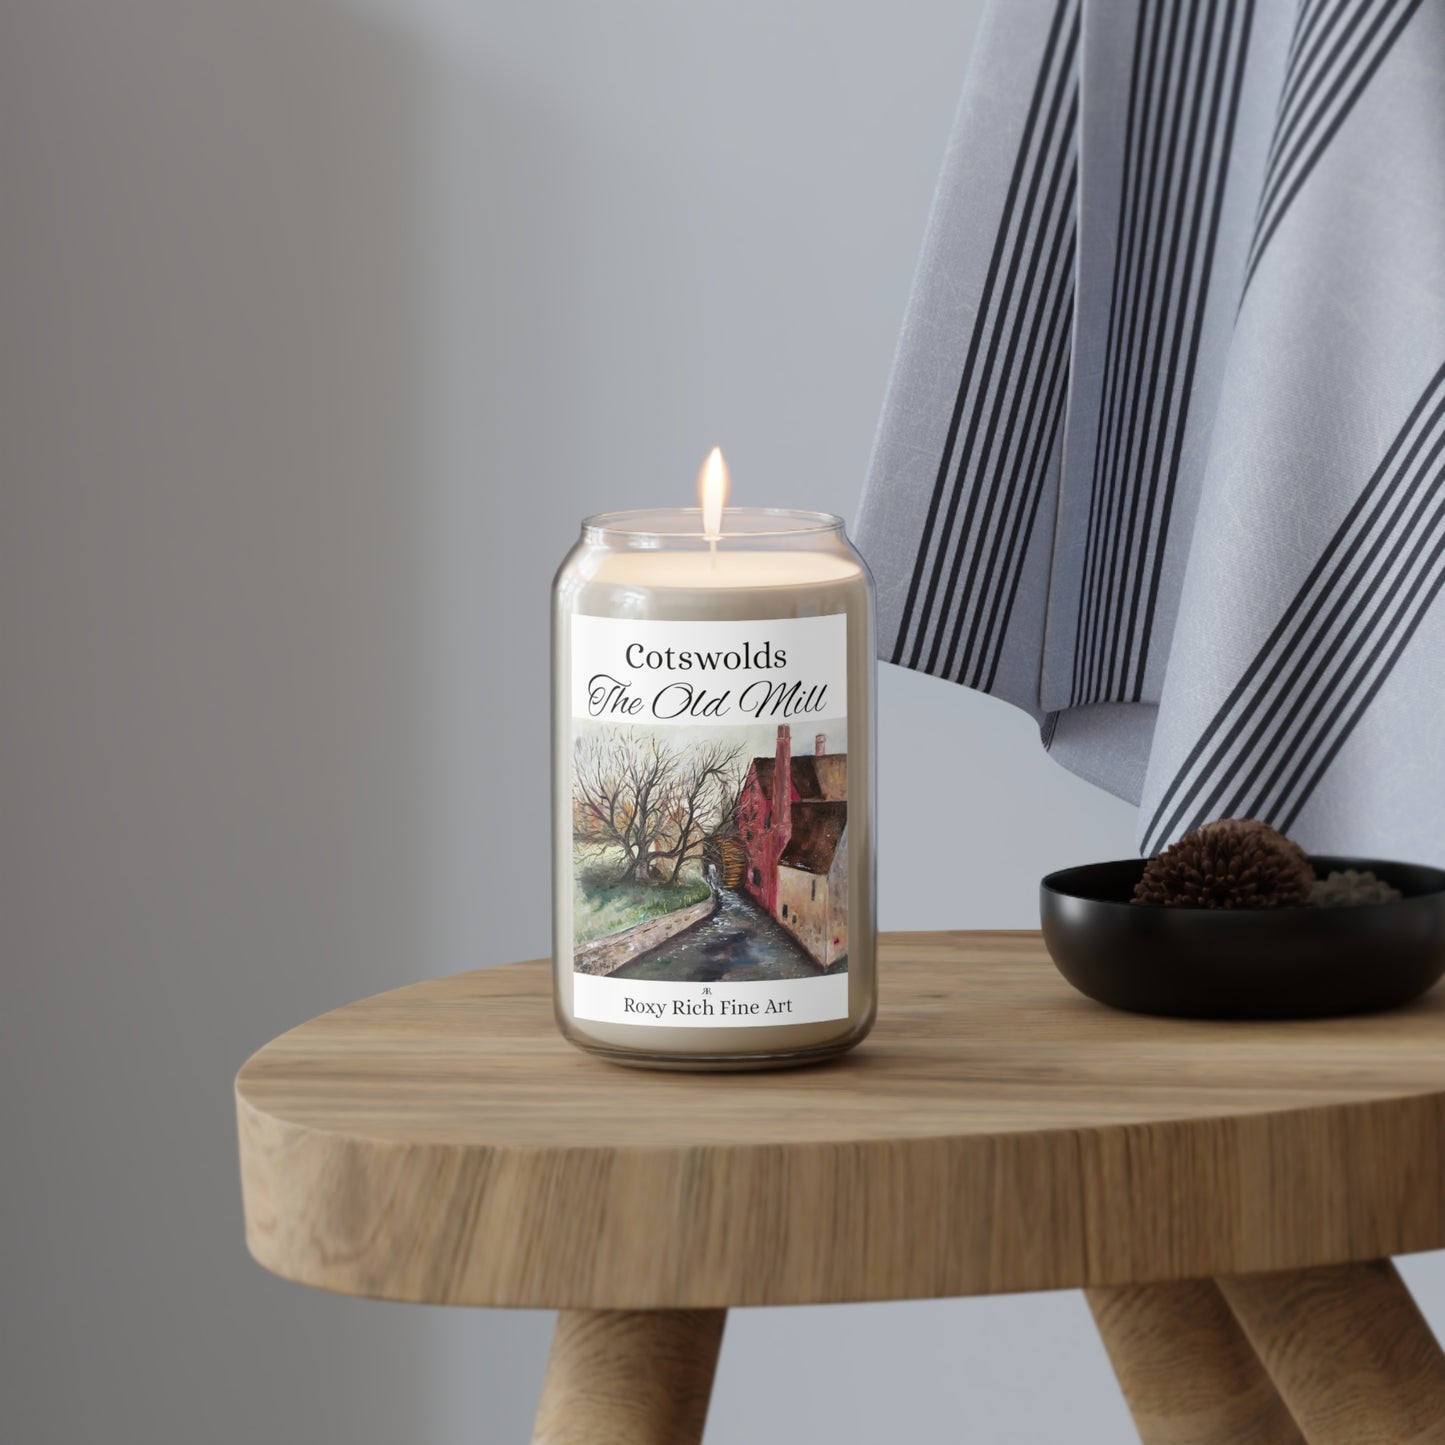 The Old Mill Cotswolds Scented Candle, 13.75oz